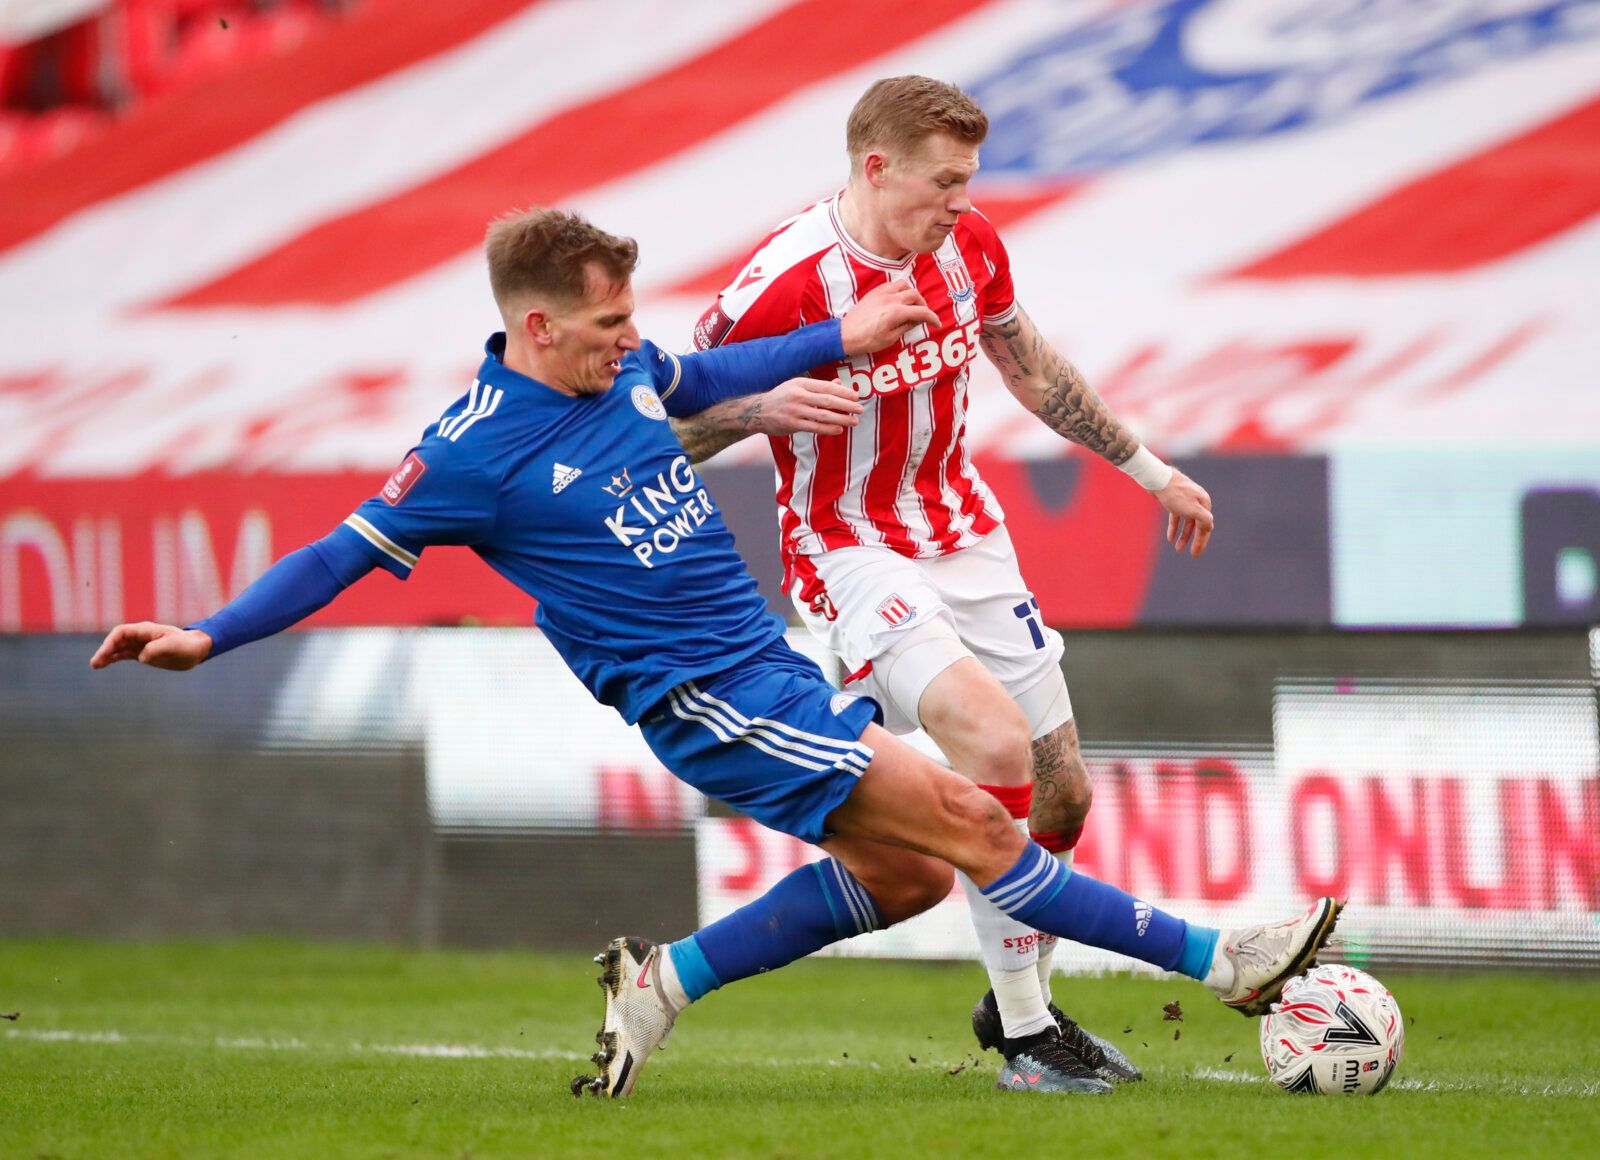 Soccer Football - FA Cup - Third Round - Stoke City v Leicester City - bet365 Stadium, Stoke-On-Trent, Britain - January 9, 2021 Stoke City's James McClean in action with Leicester City's Marc Albrighton Action Images via Reuters/Andrew Boyers